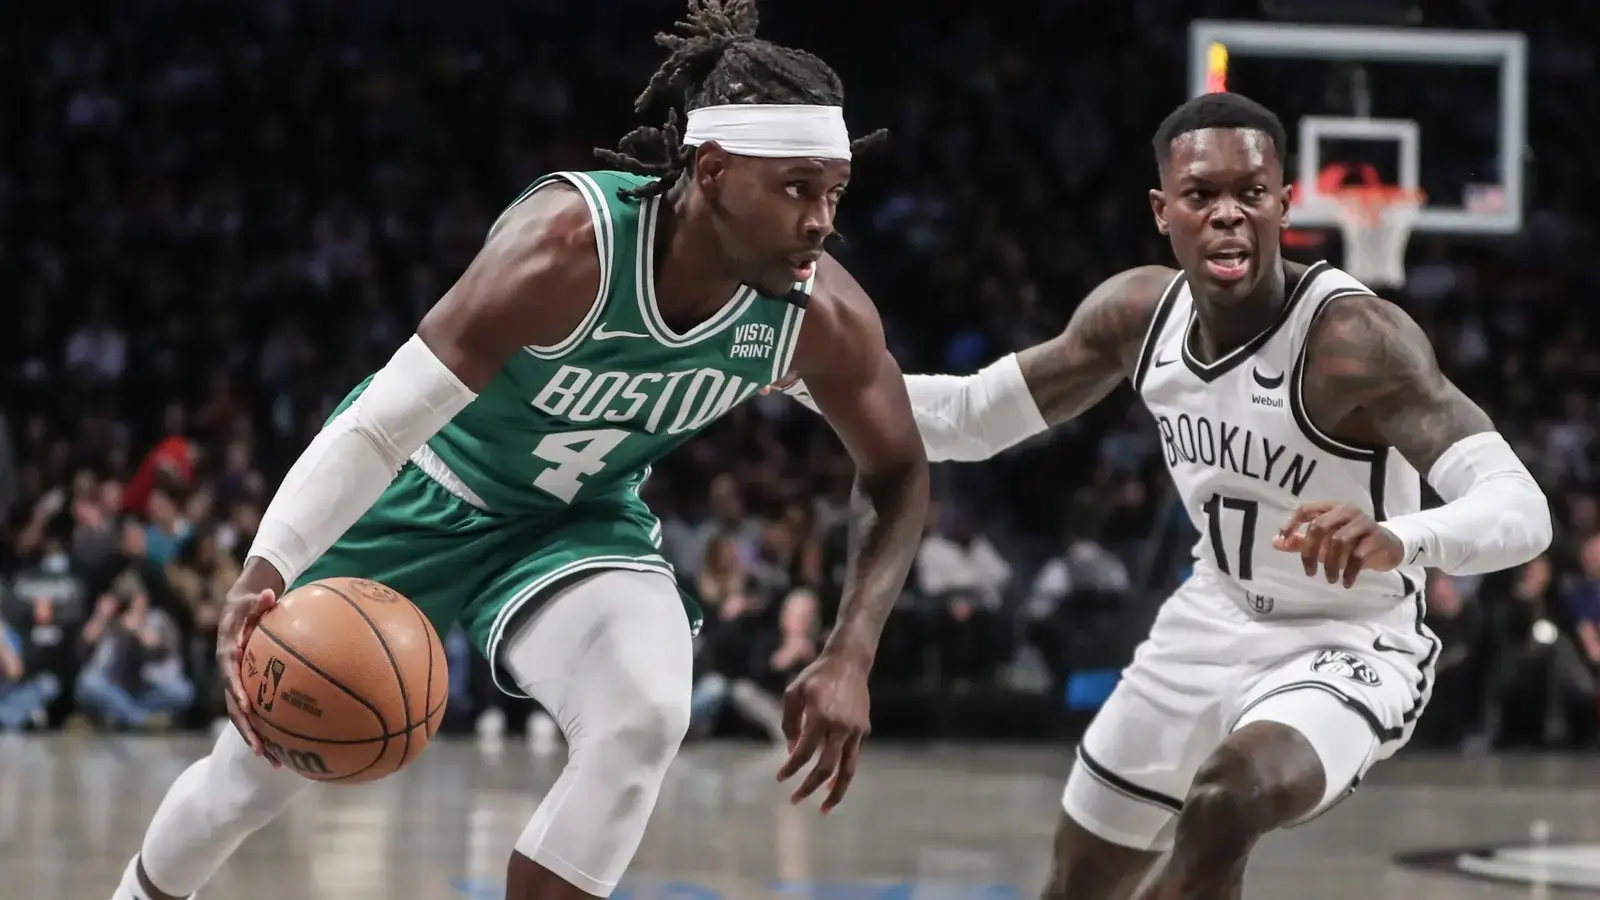 Boston Celtics guard Jrue Holiday (4) looks to drive past Brooklyn Nets guard Dennis Schroder (17) in the first quarter at Barclays Center. / Wendell Cruz-USA TODAY Sports